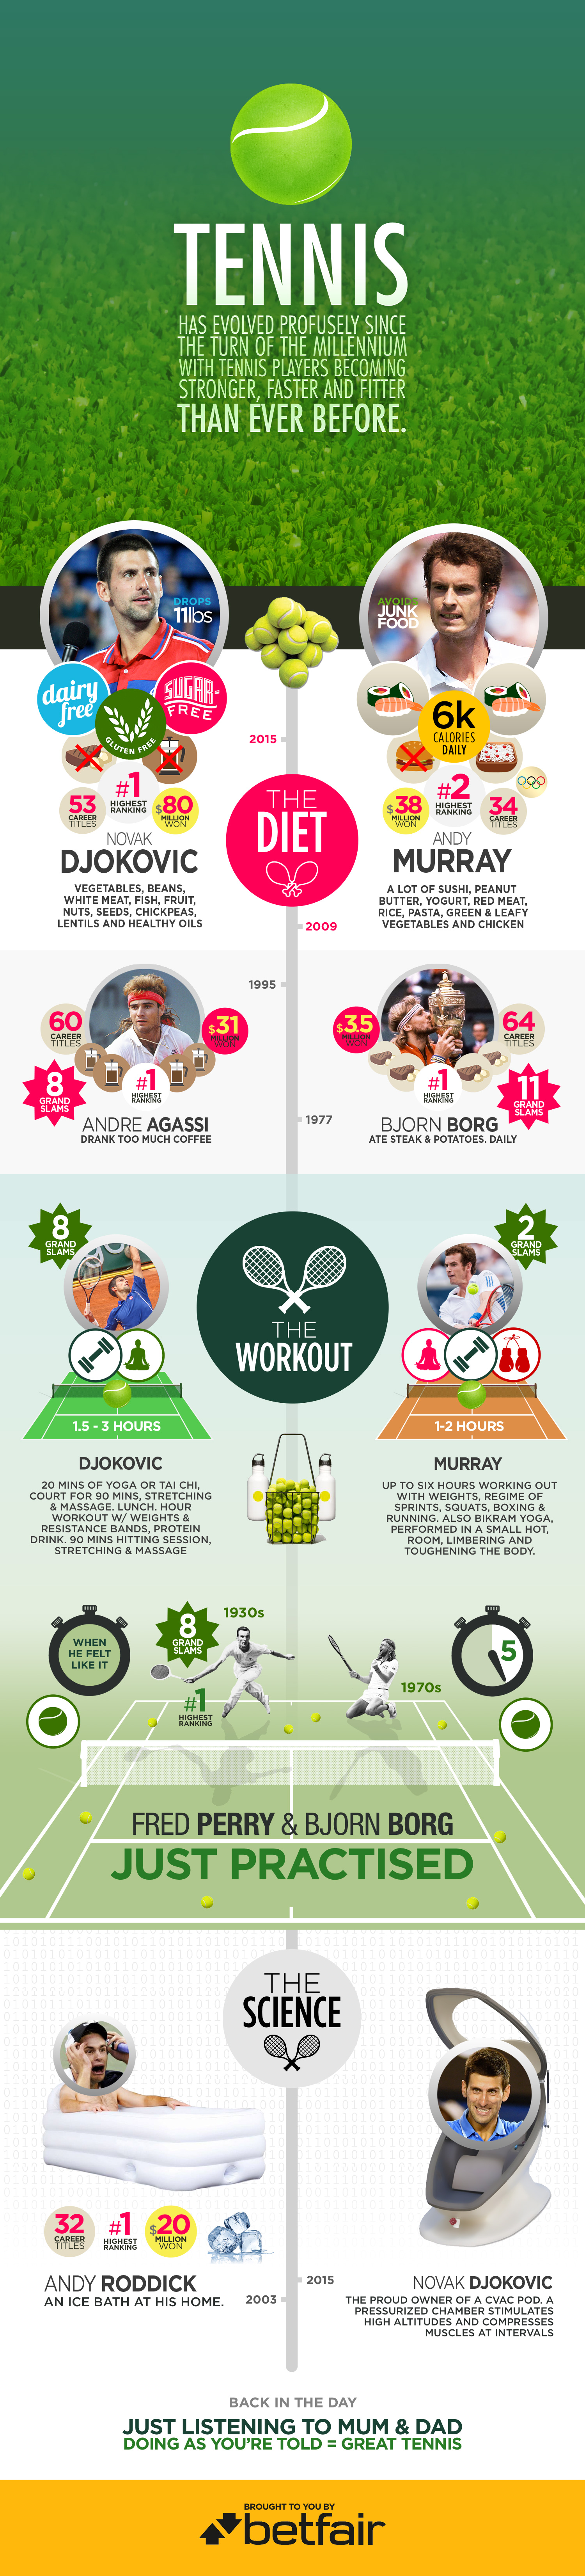 Emulating the champions of tennis will make you feel like a champion